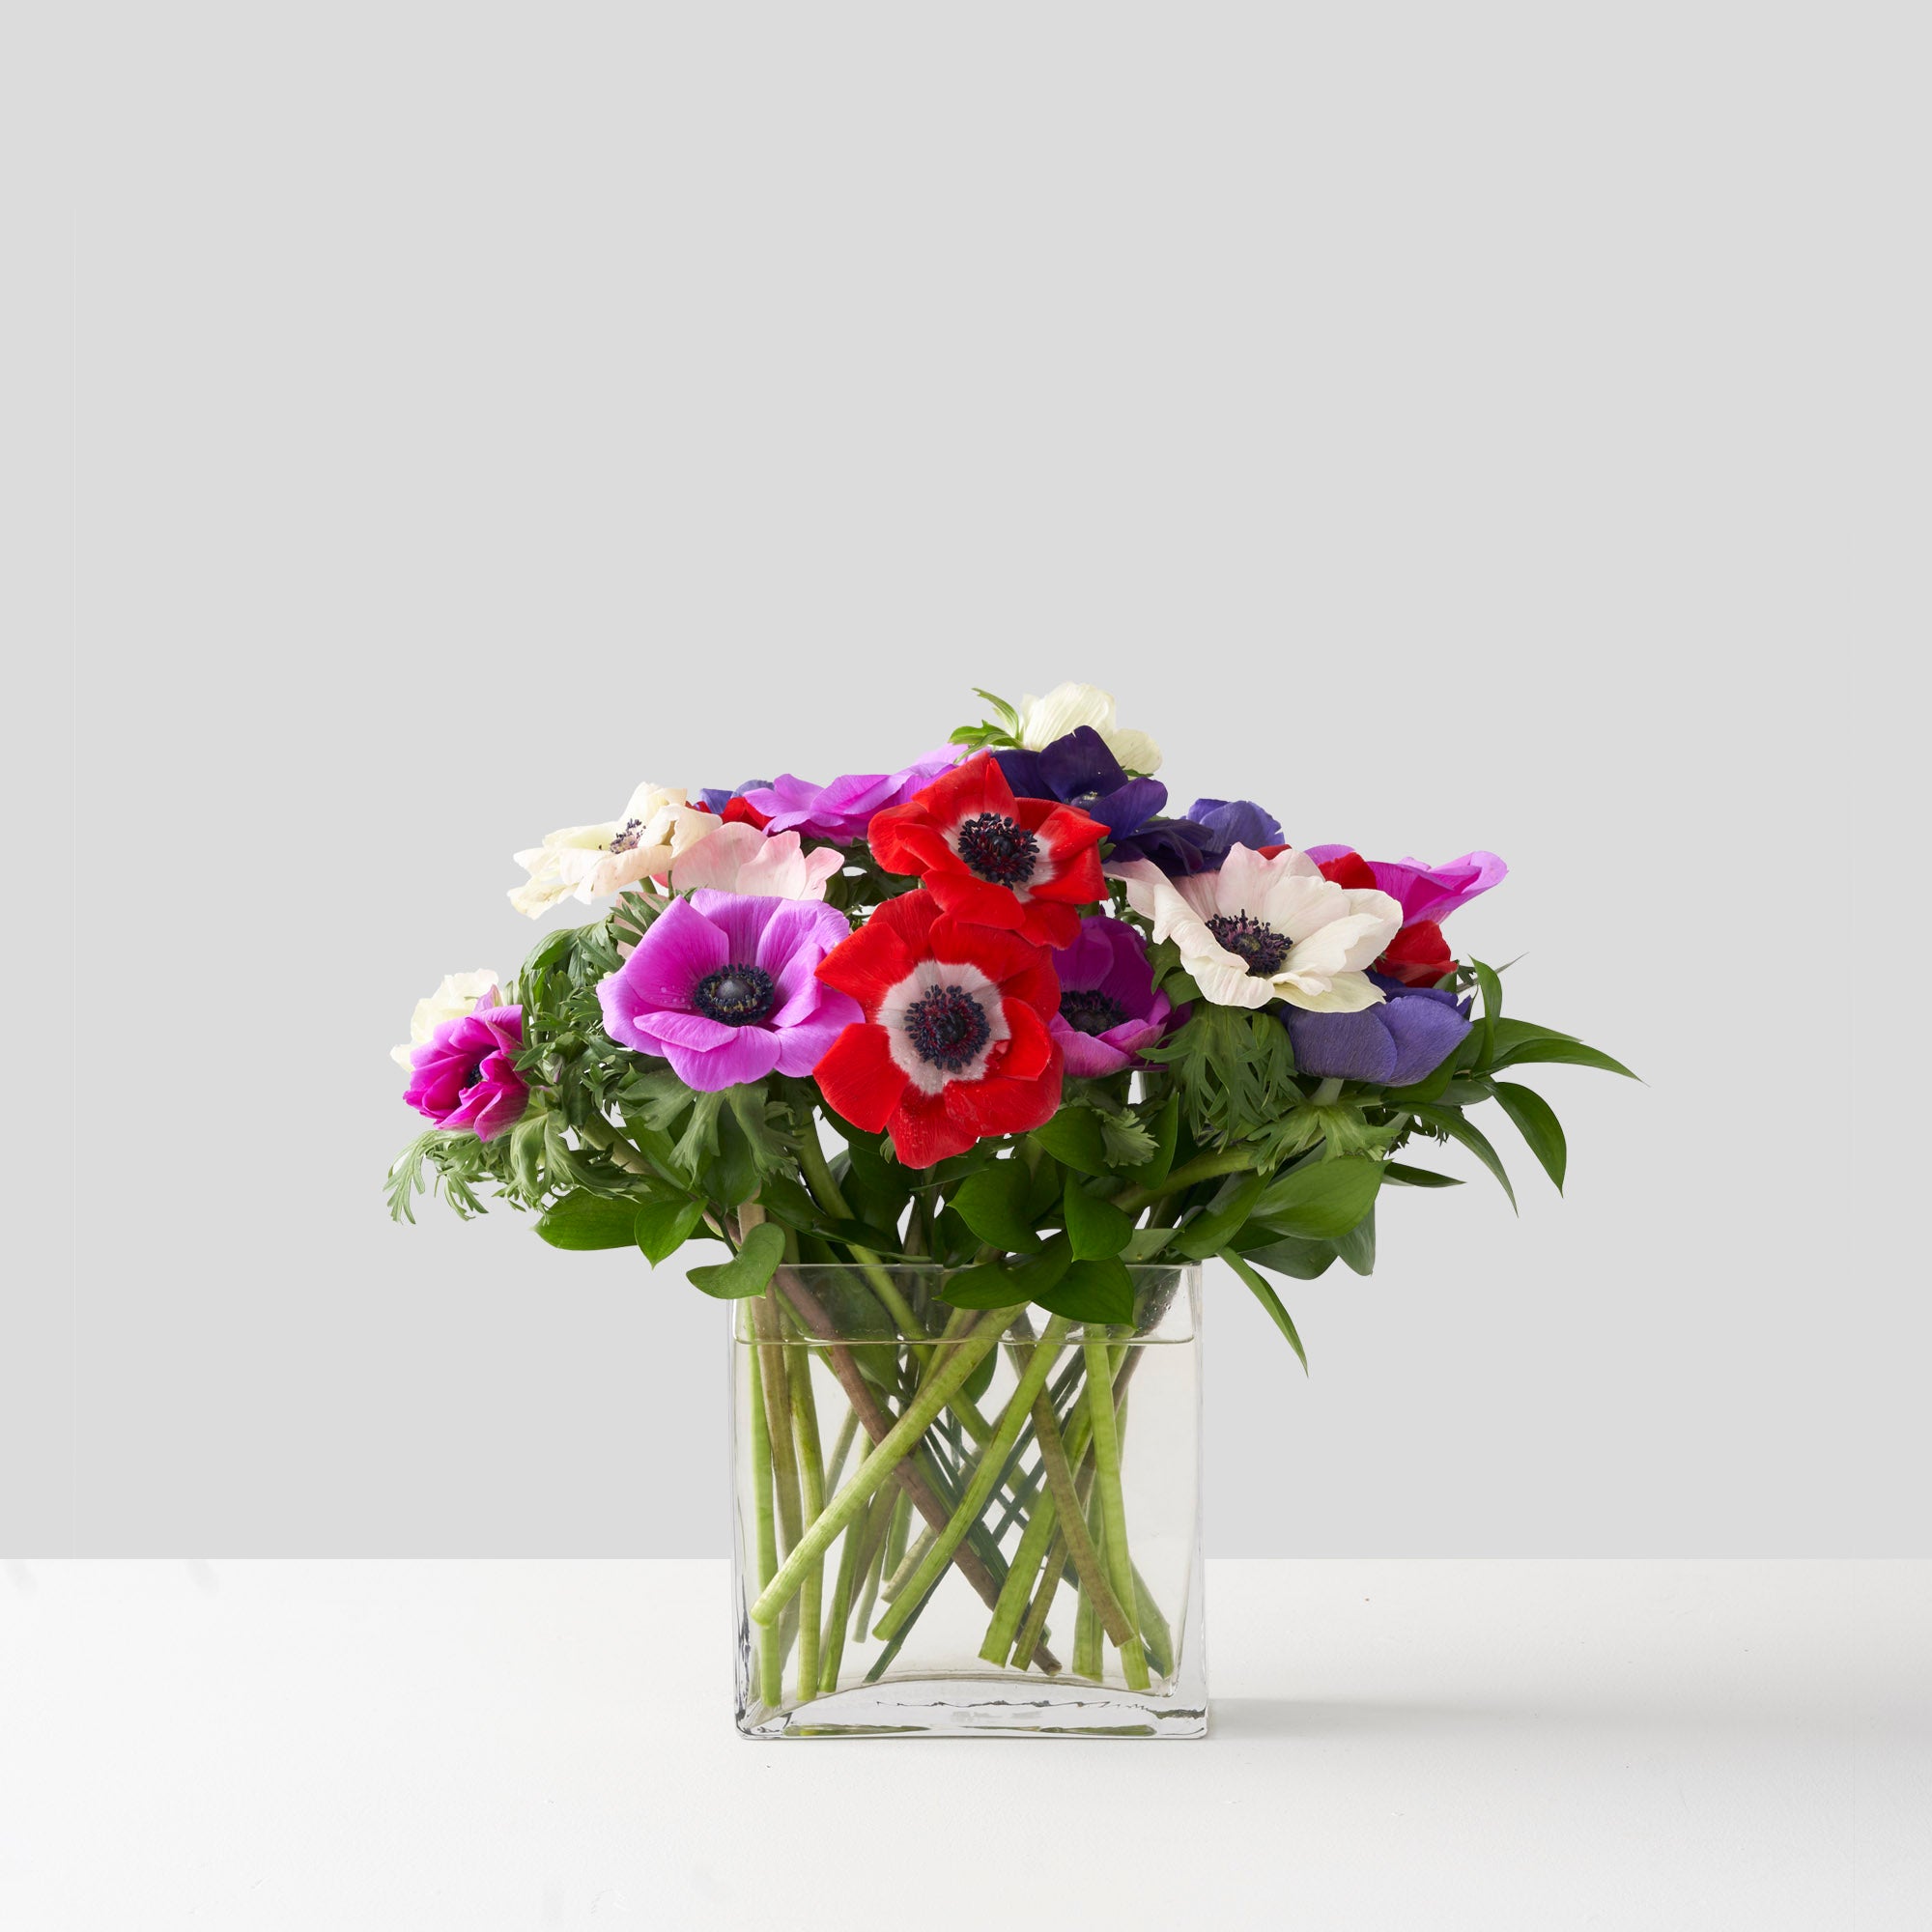 Clear gall rectagular glass vase filled with pink, purpl, white, and red, anemonie flower on white background.